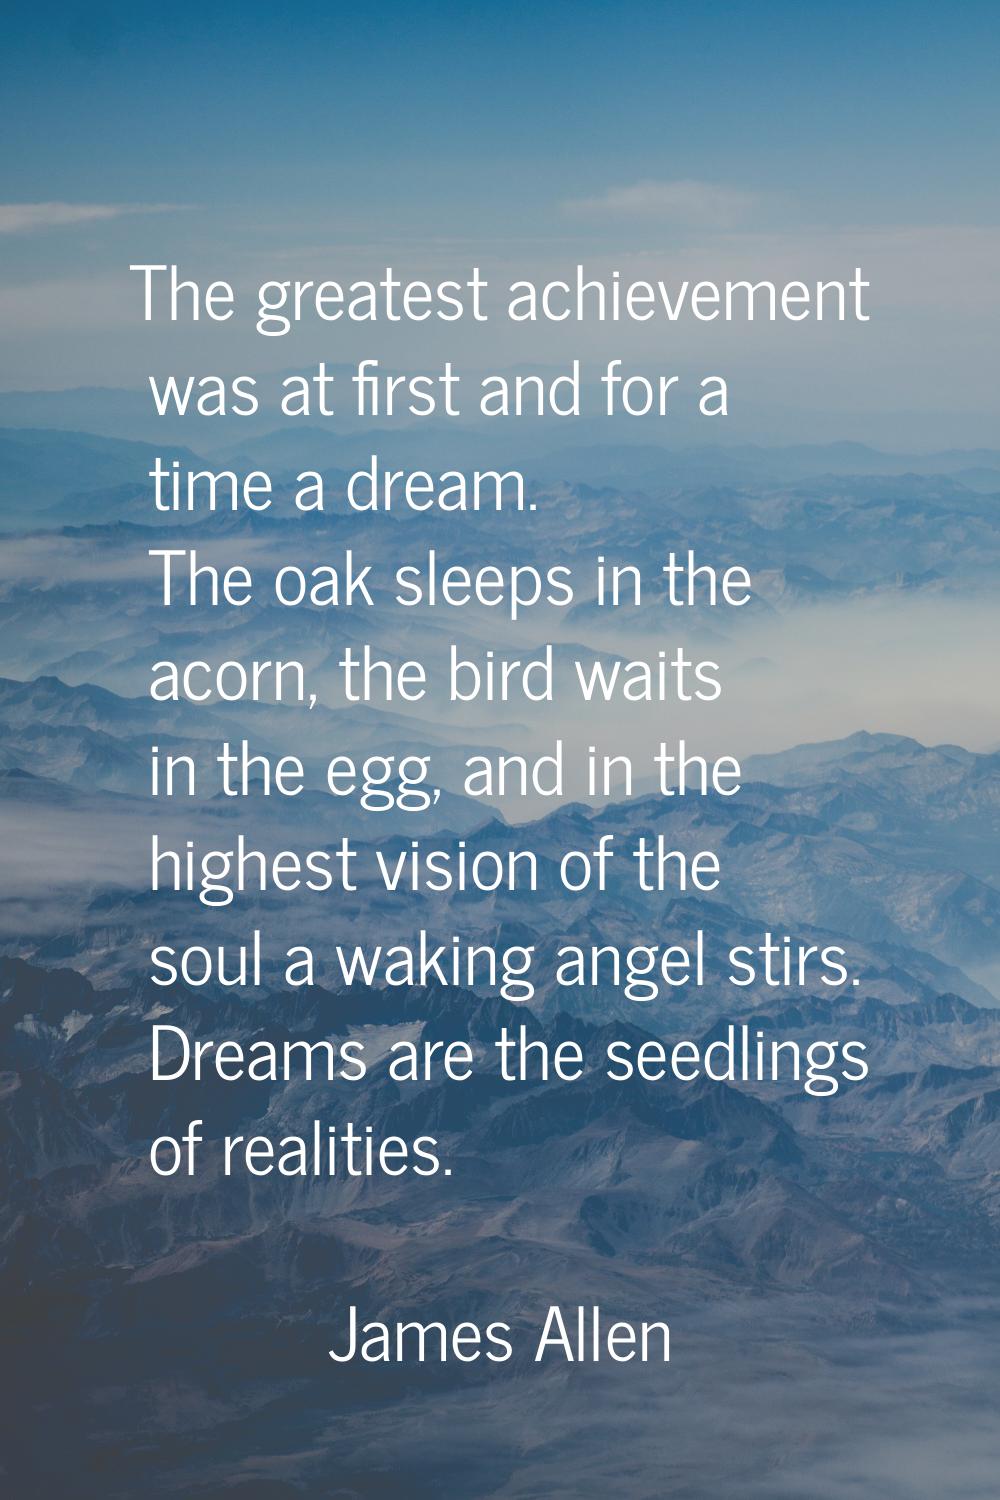 The greatest achievement was at first and for a time a dream. The oak sleeps in the acorn, the bird